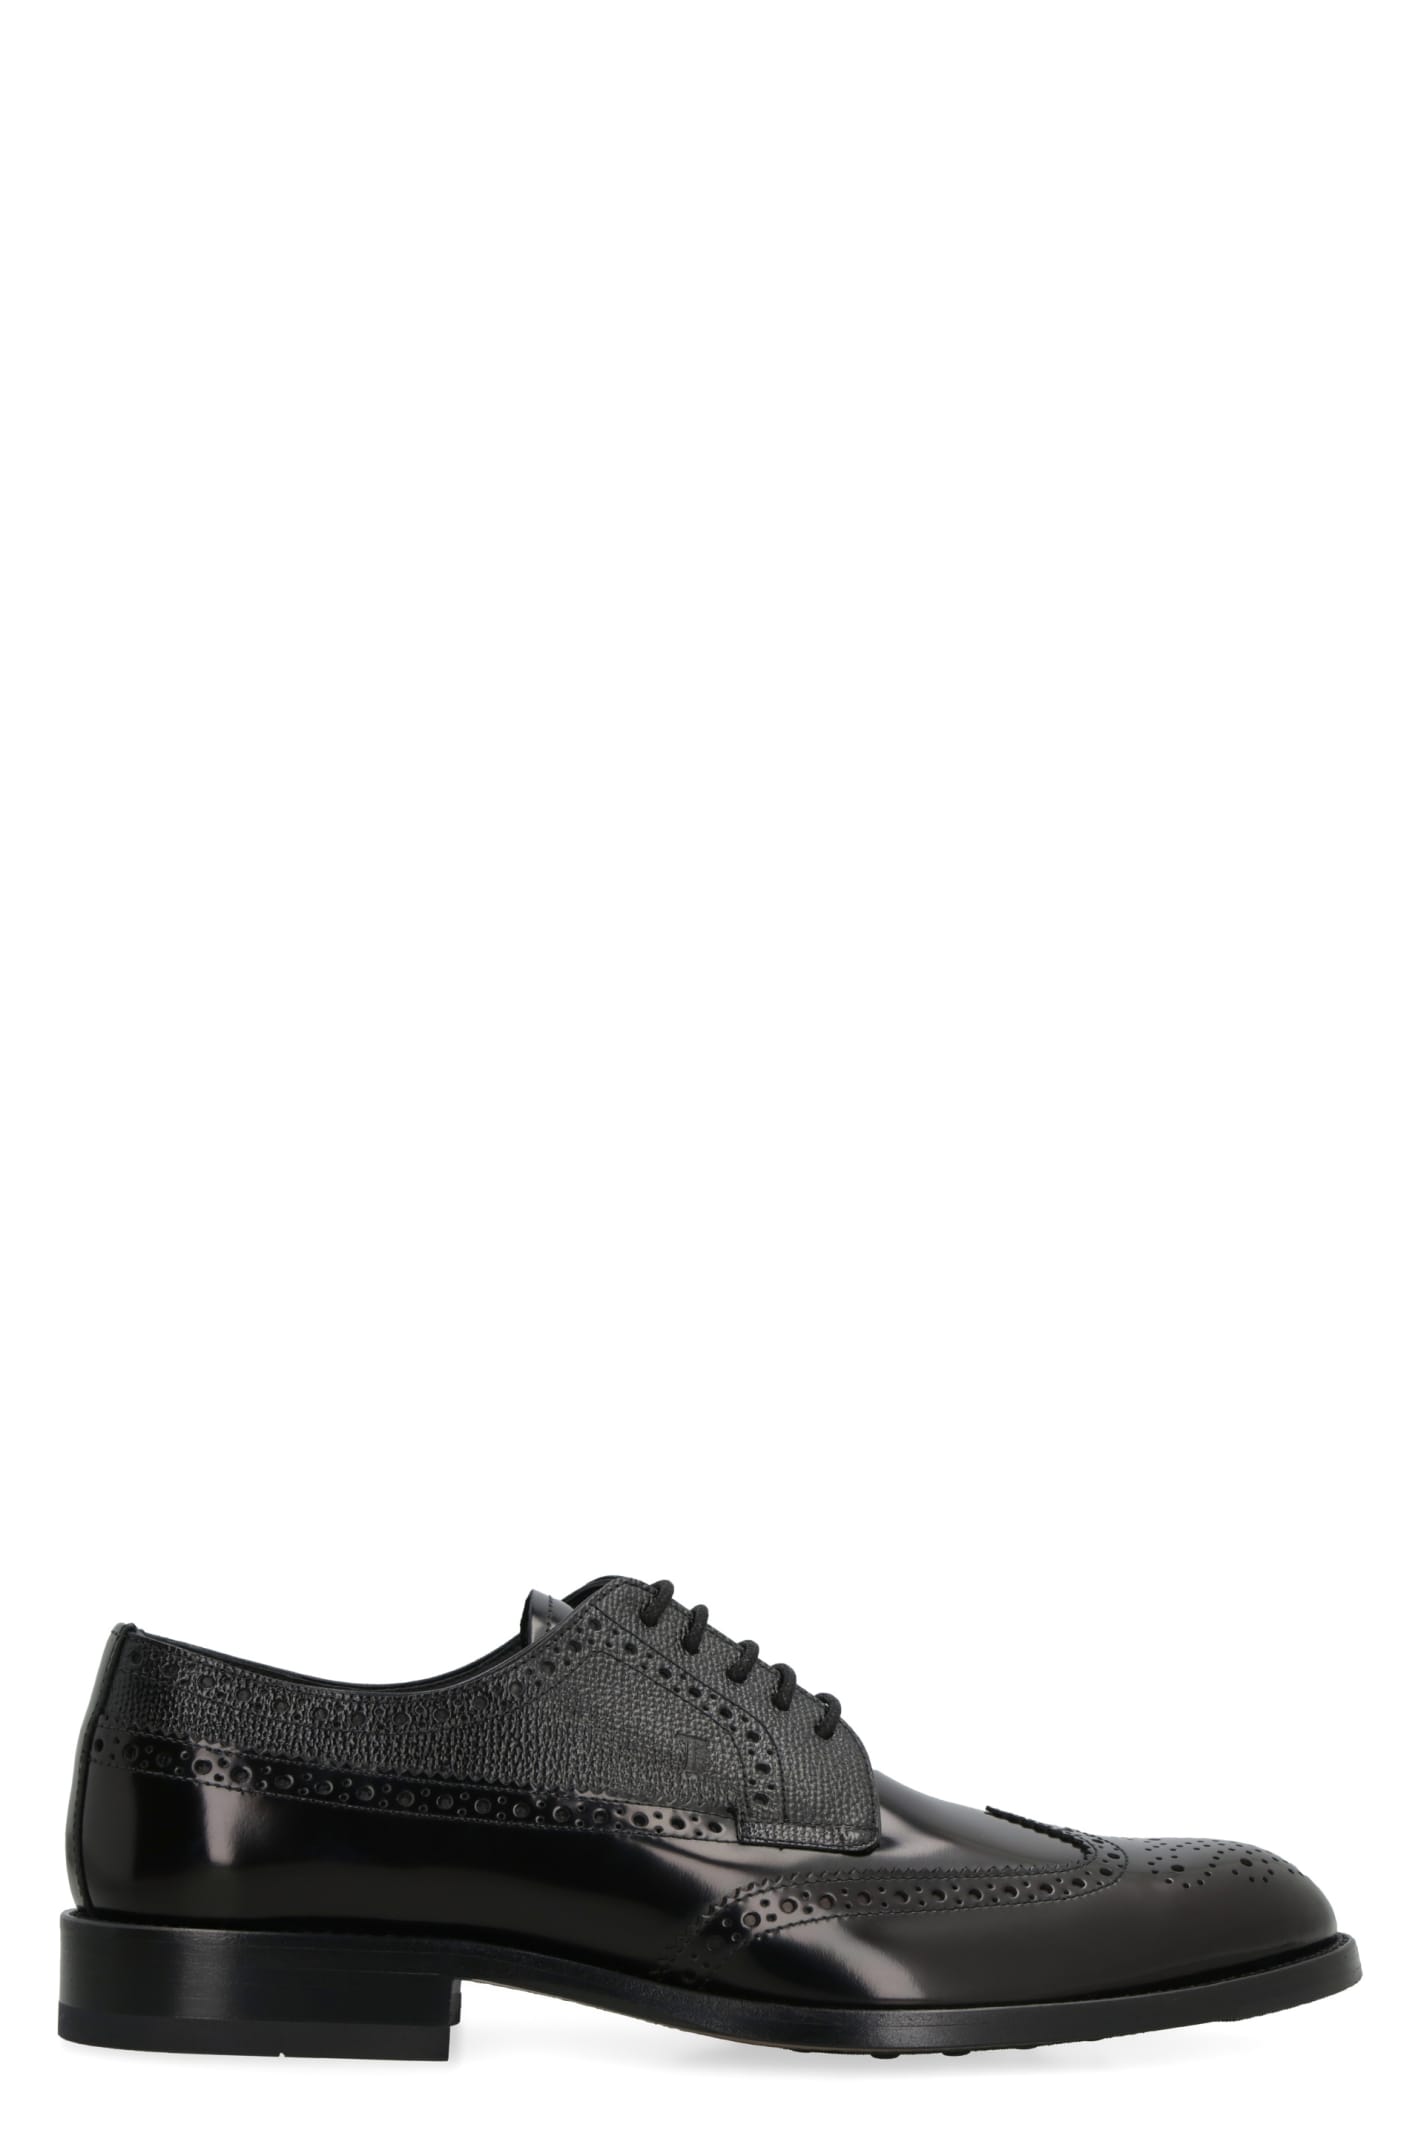 TOD'S LEATHER LACE-UP SHOES